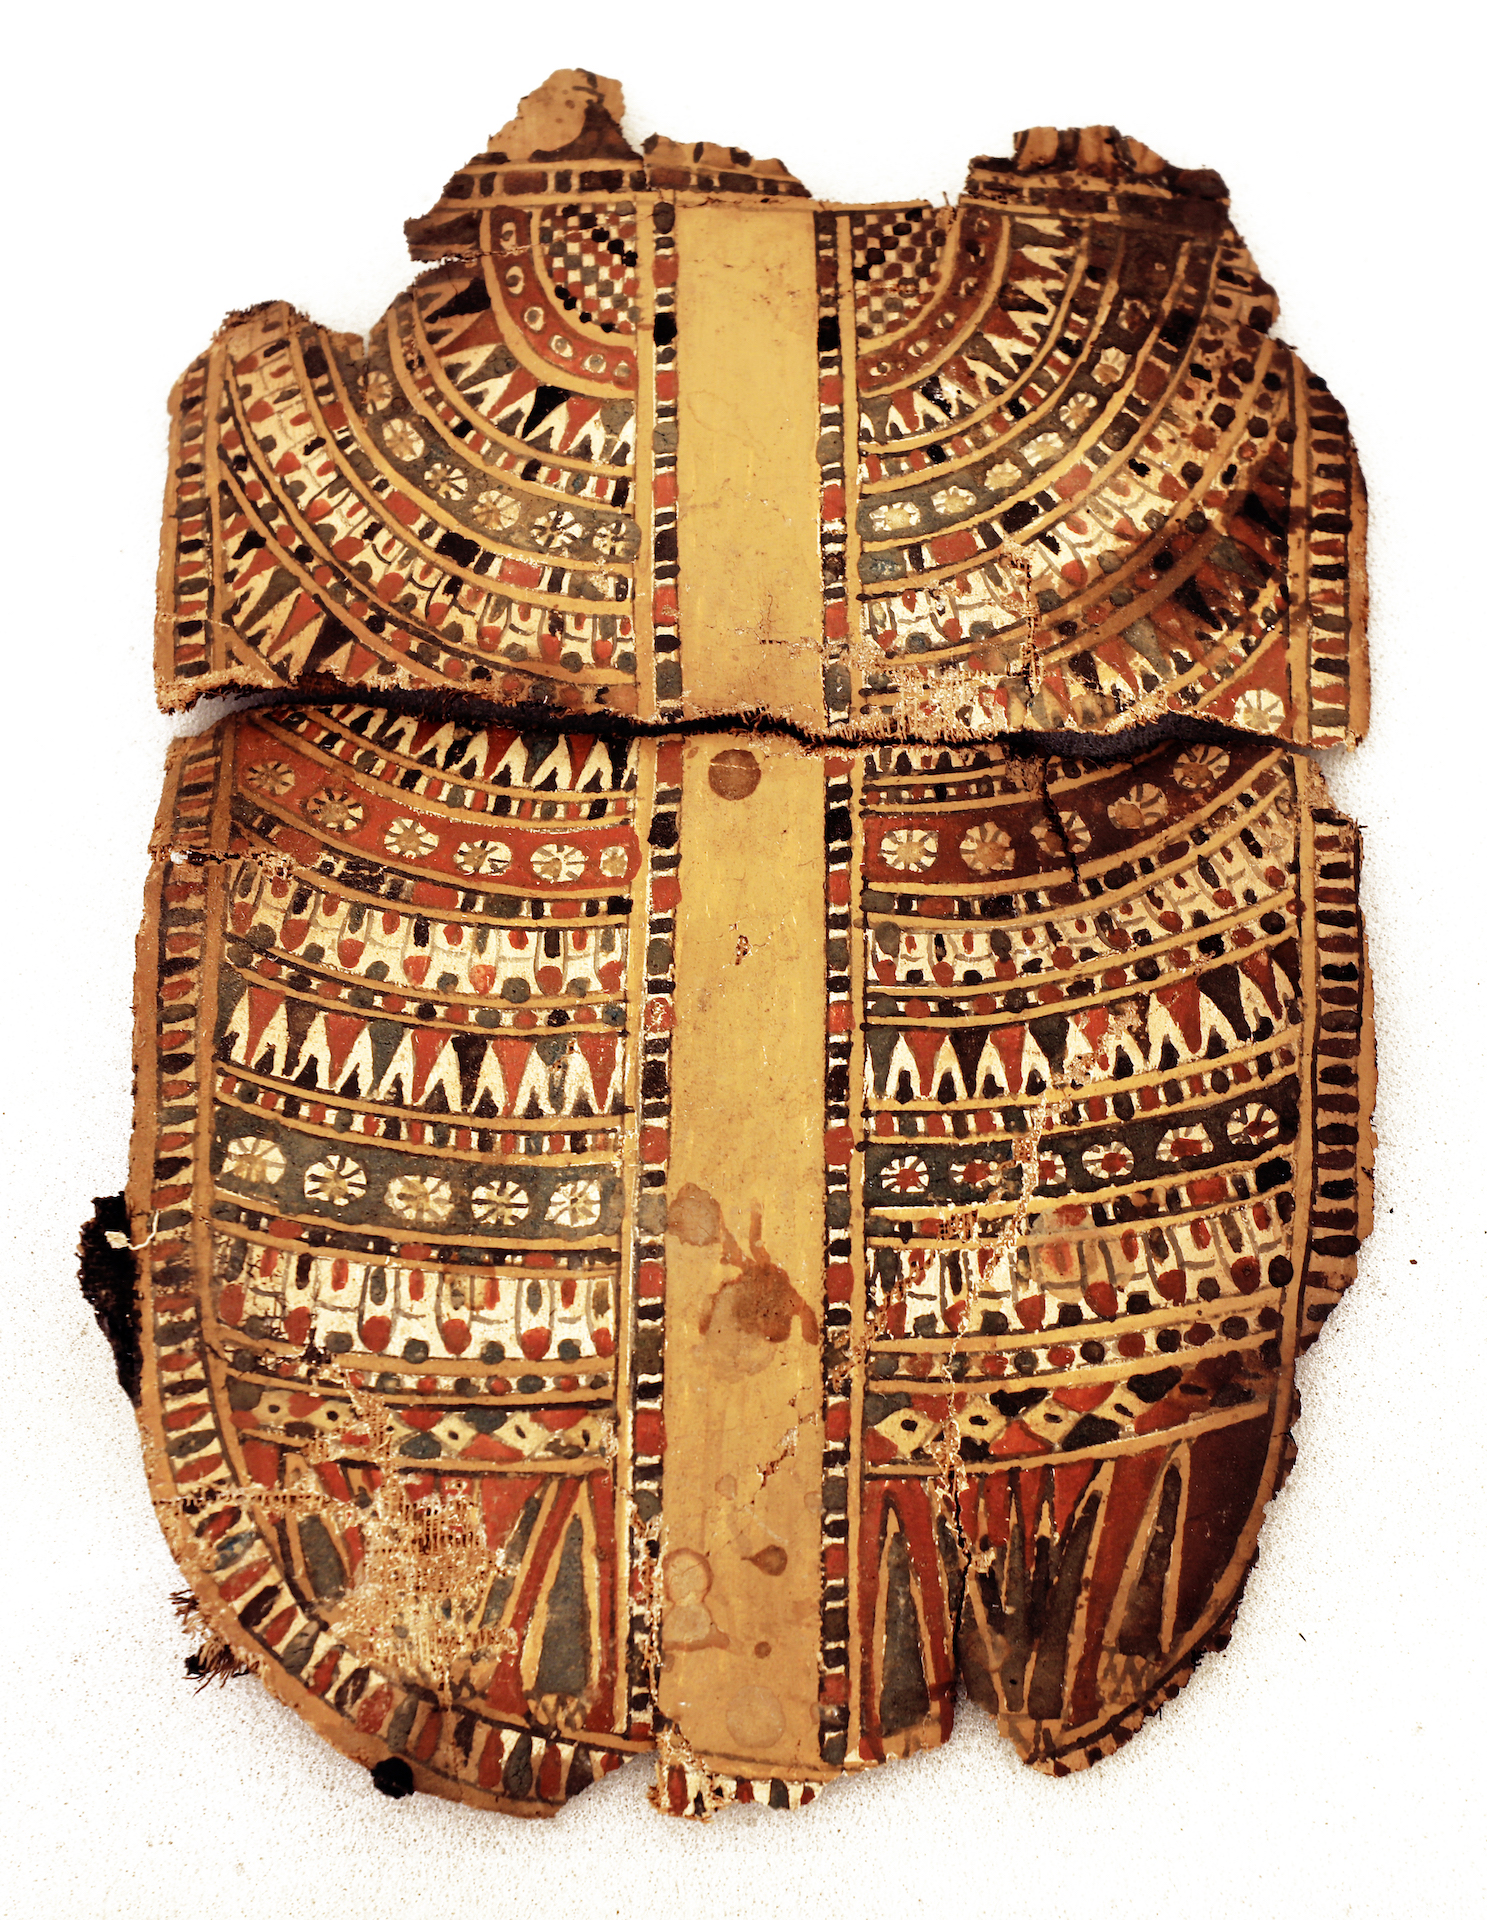 Researchers discovered this colorful cartonnage inside the coffin of a child.